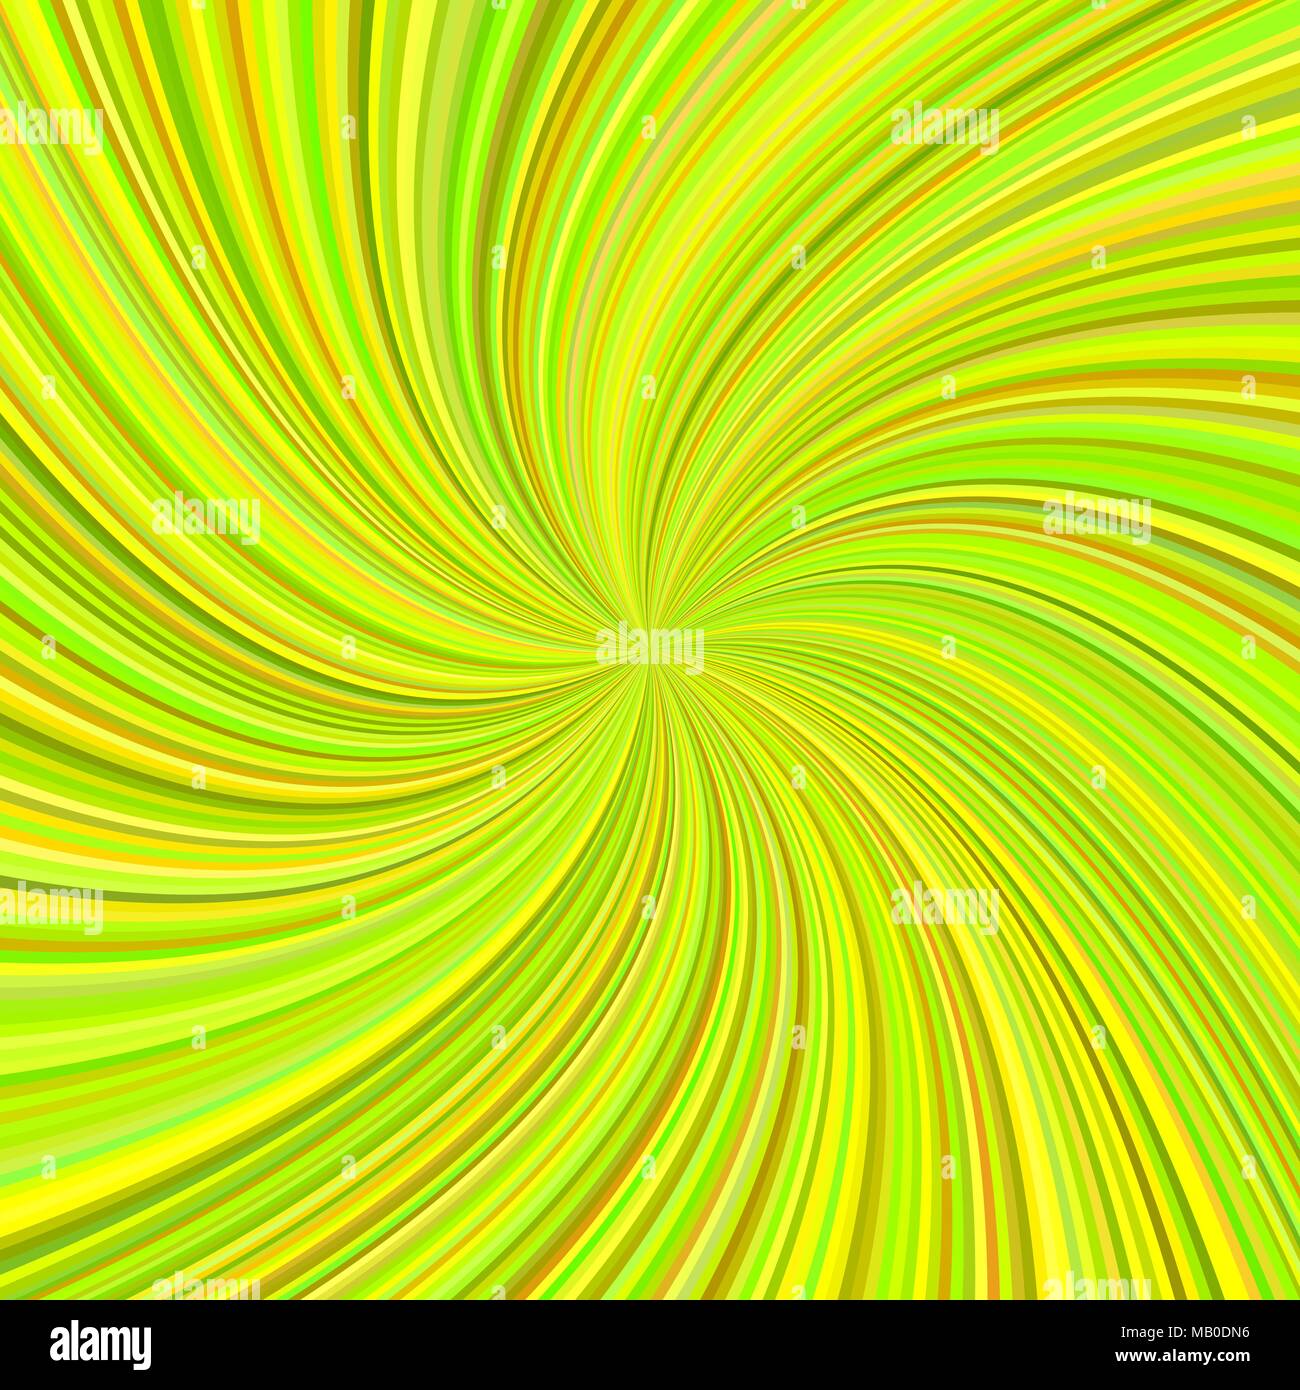 Lime color abstract swirl background Stock Vector